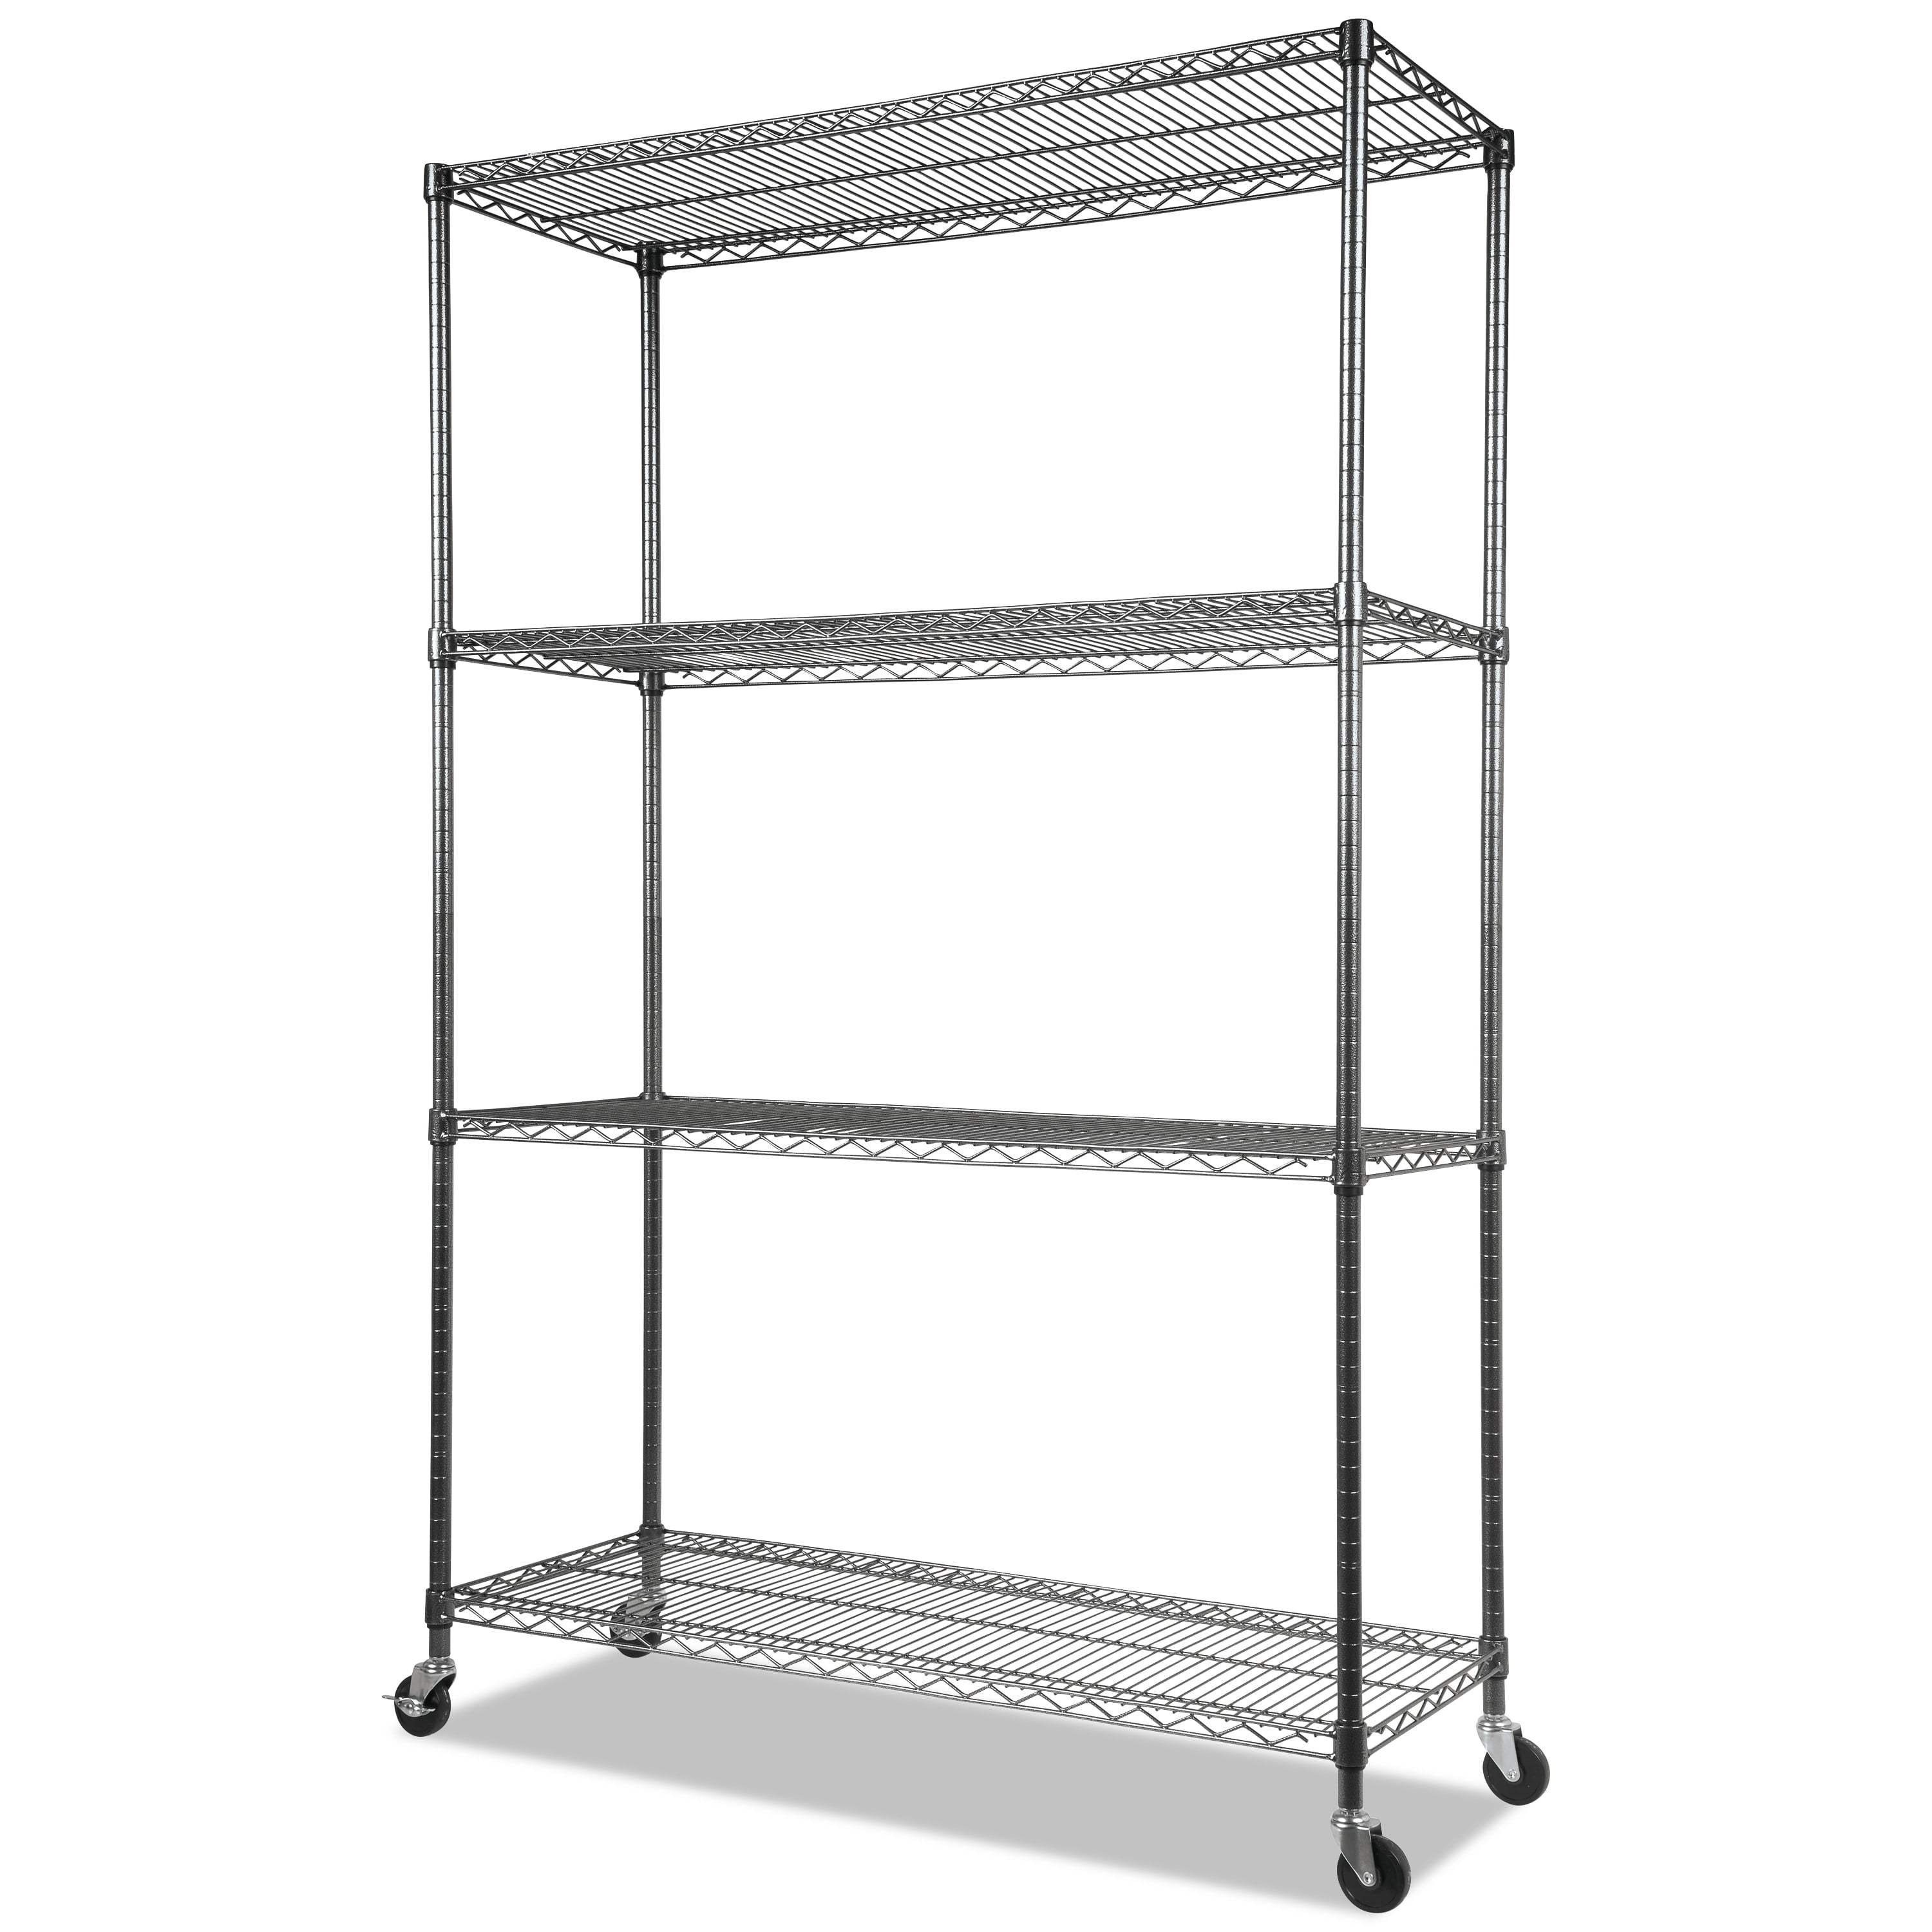 Alera Complete Wire Shelving Unit with 